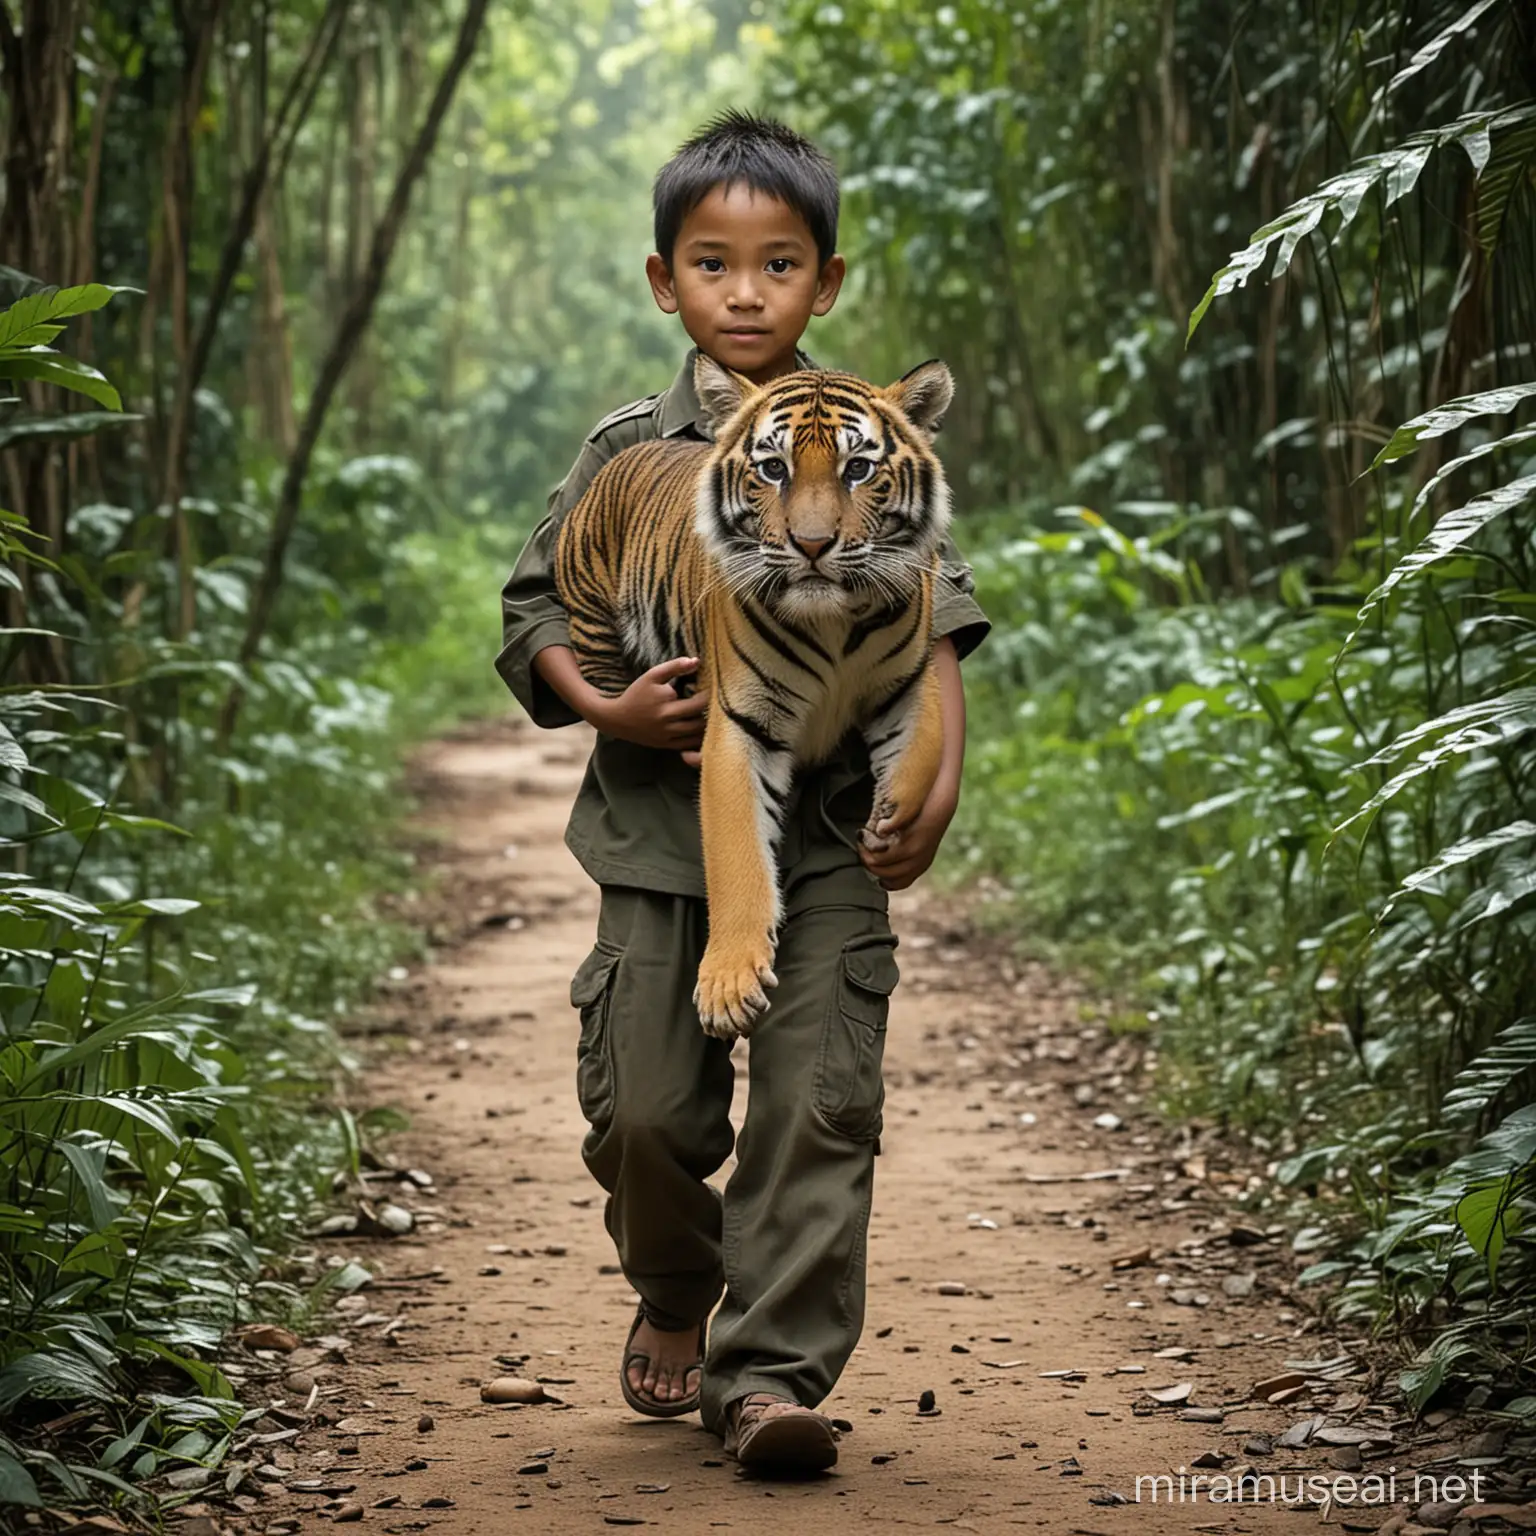 Indonesian Boy Carrying Baby Tiger in Dense Jungle